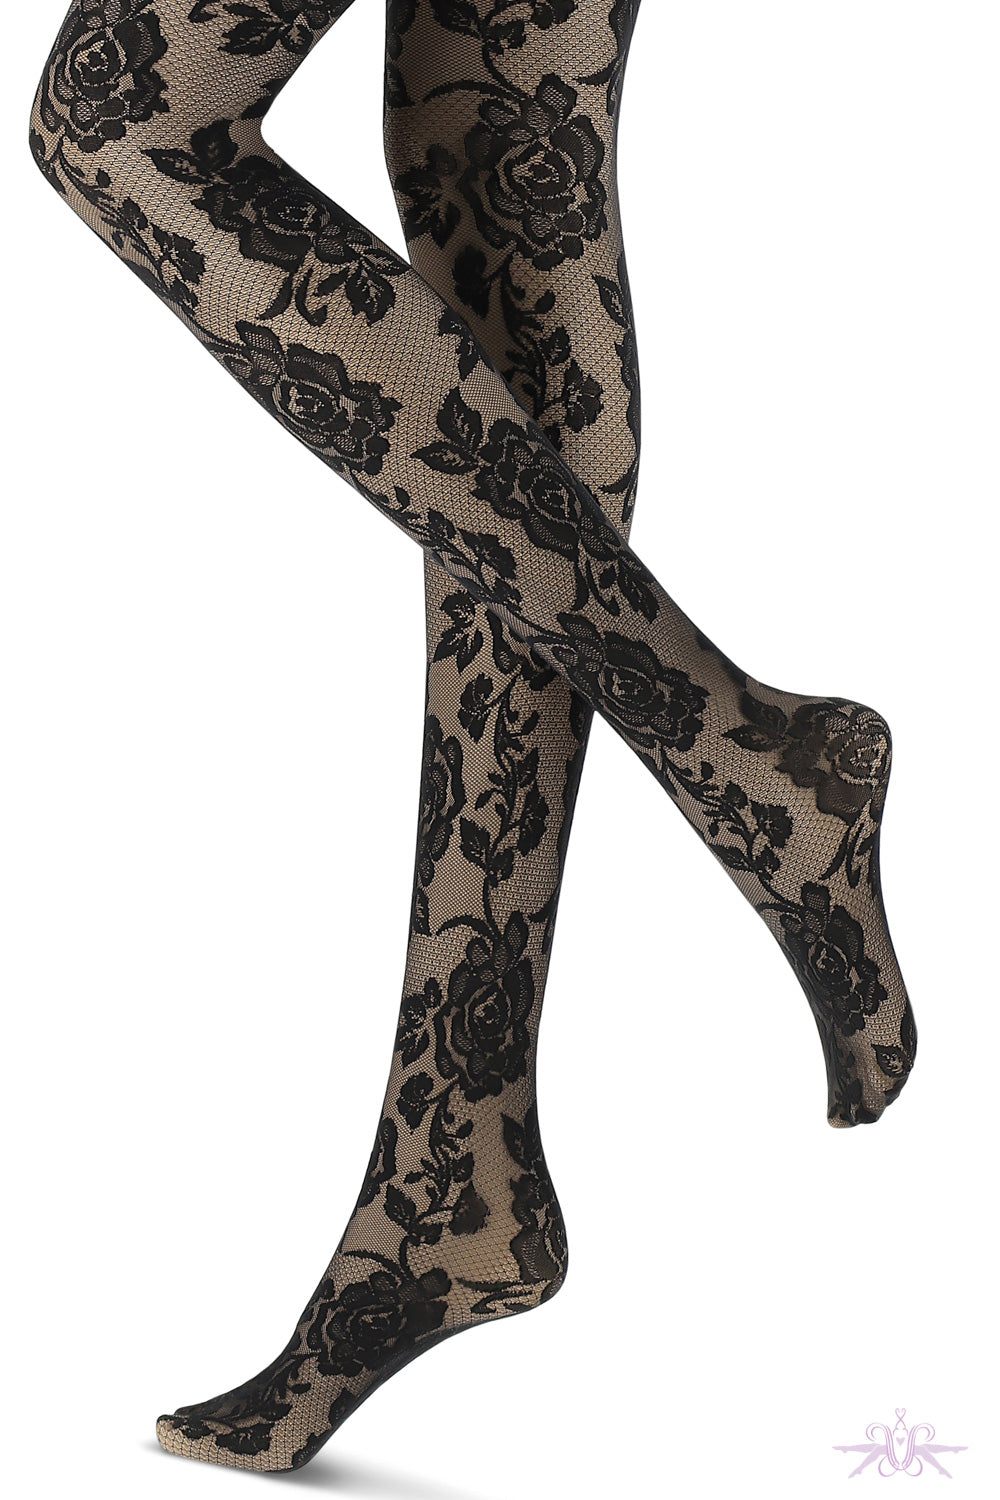 Coloured Lace Tights with Floral Fishnet Design